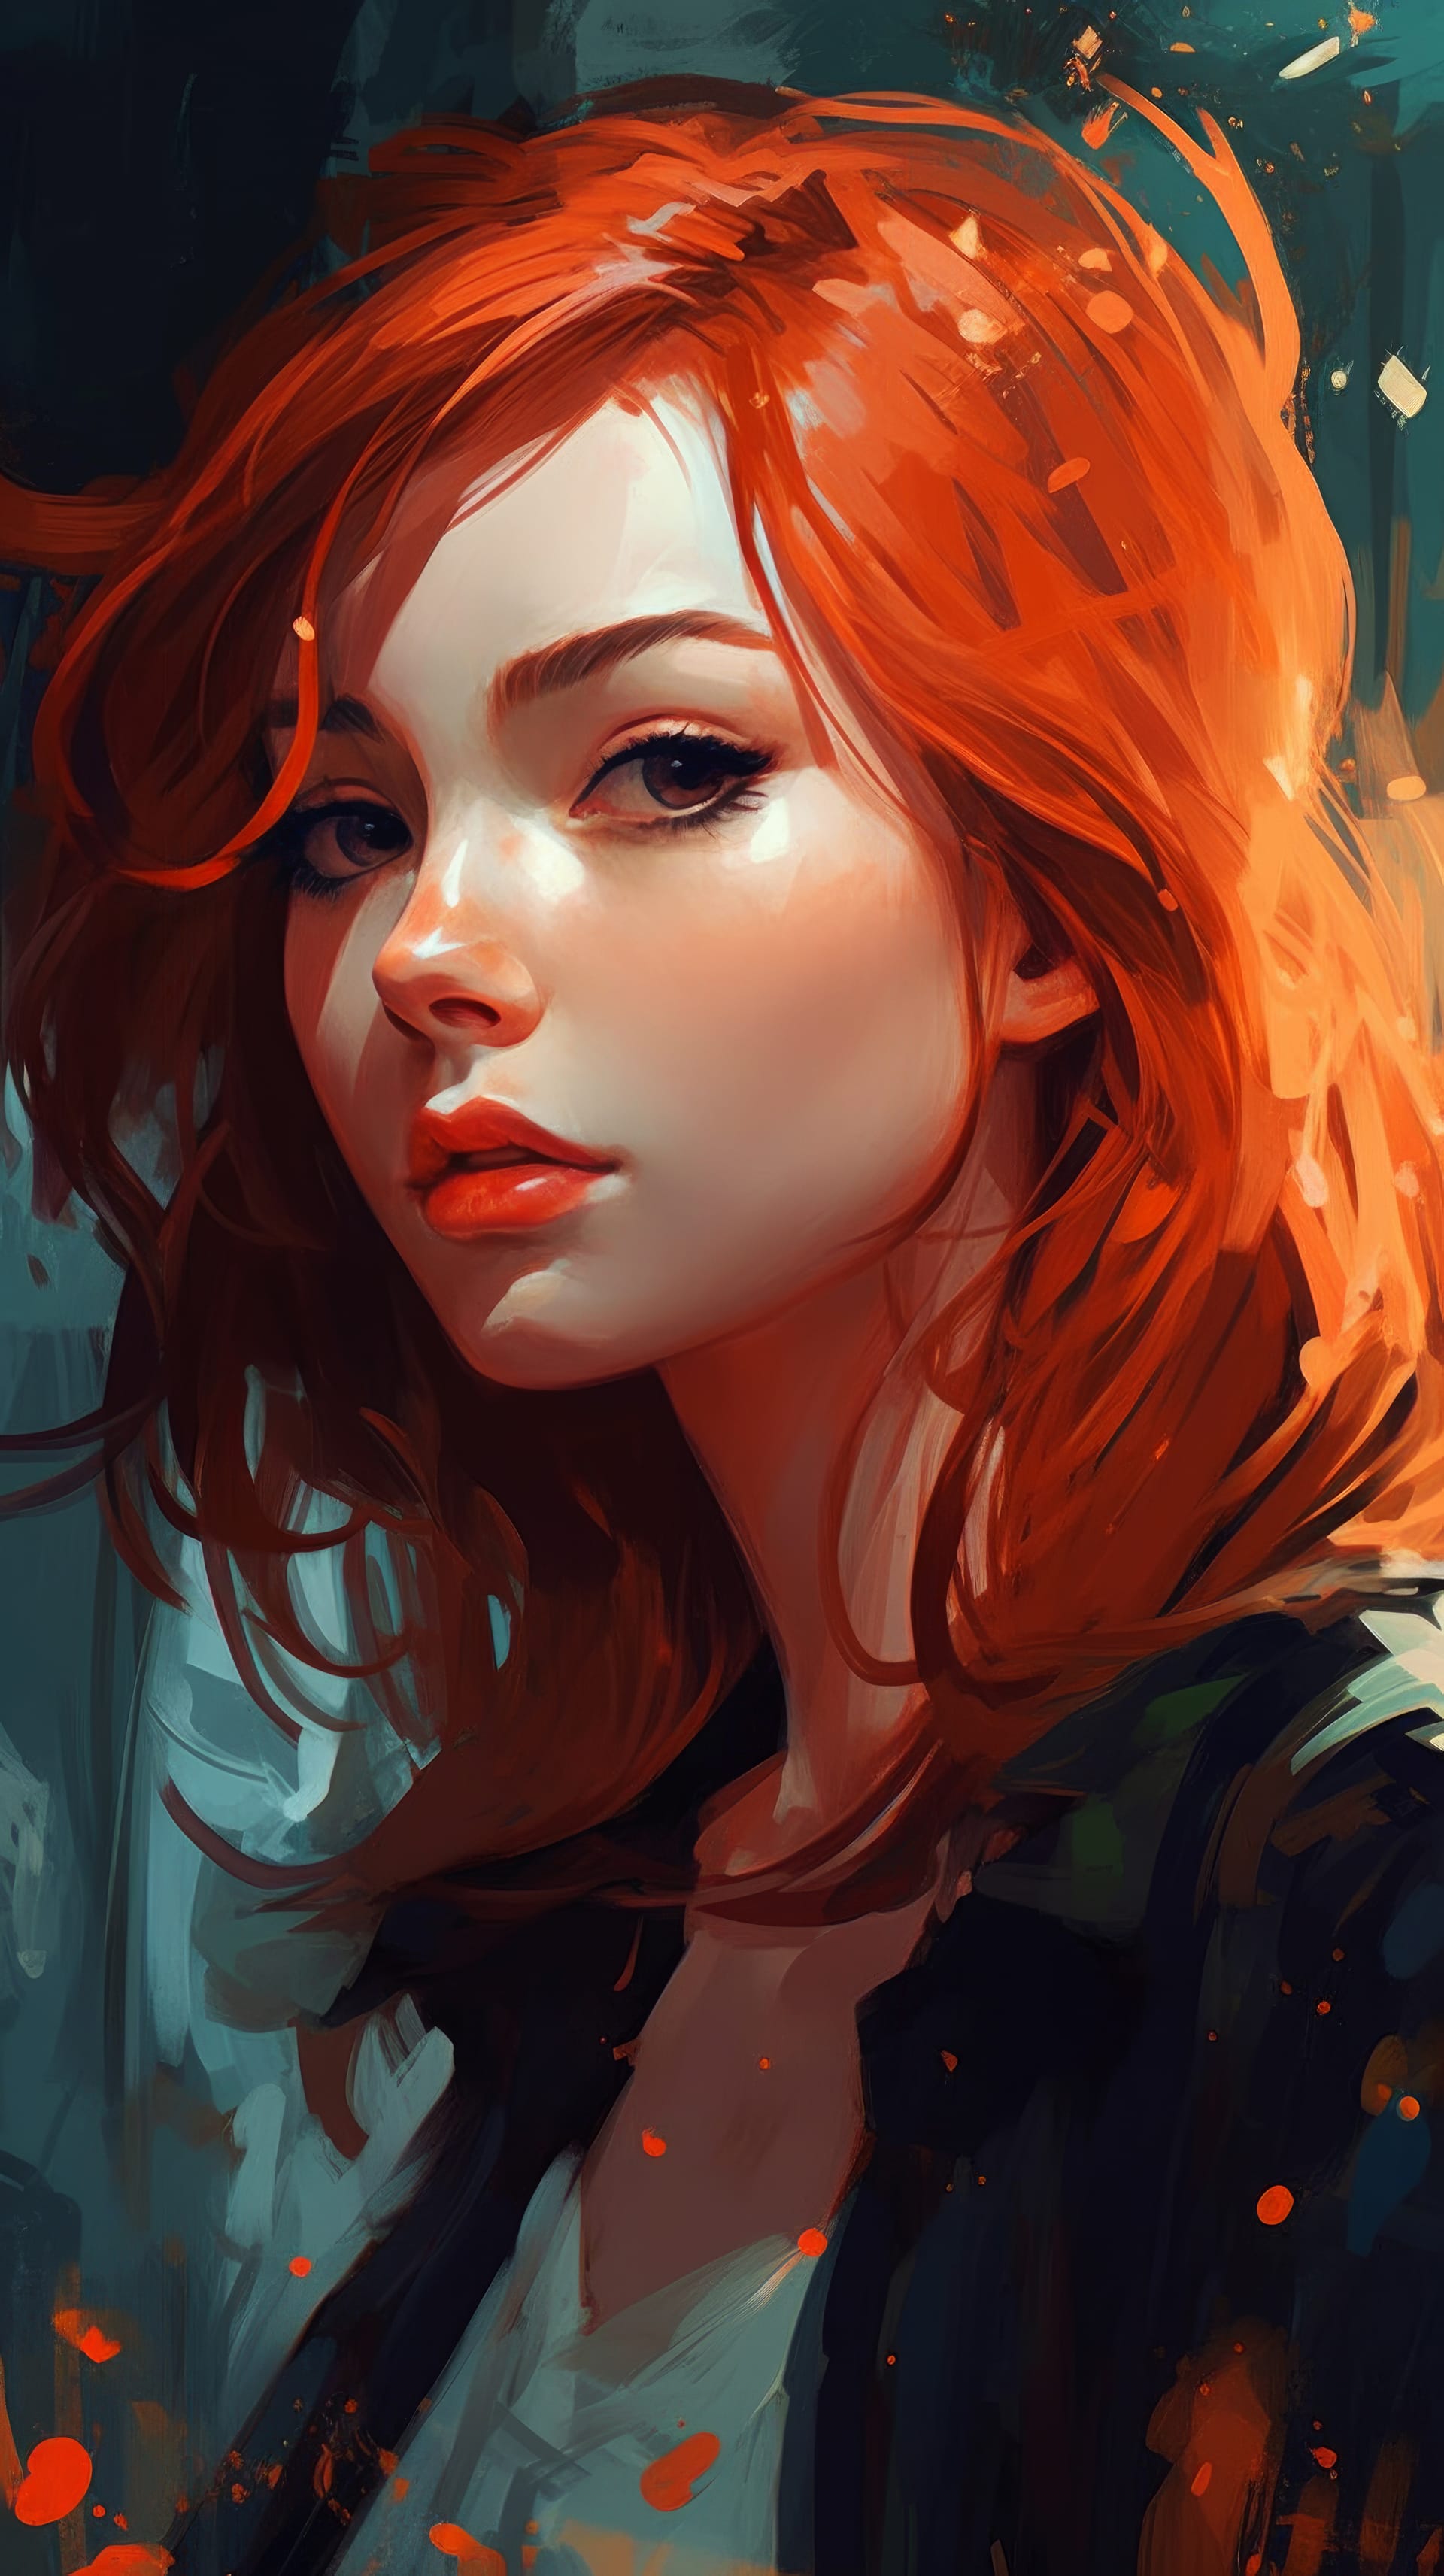 Young girl with orange hair graceful image